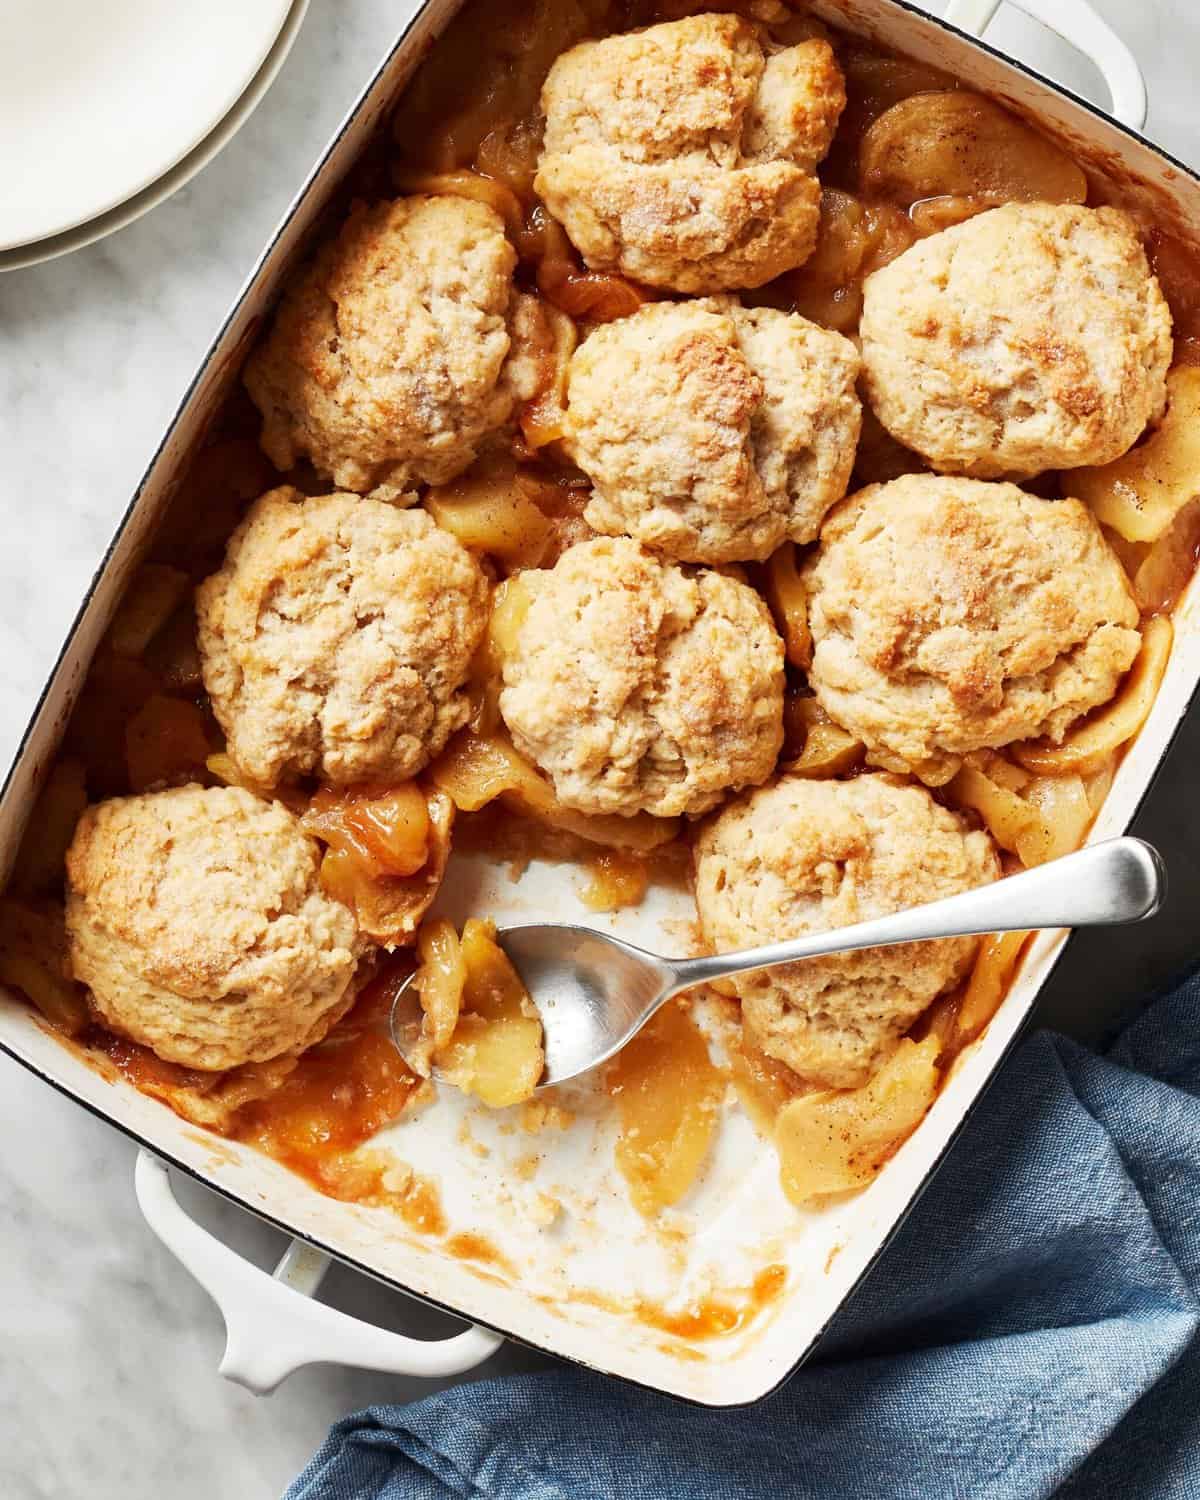  Baked to golden perfection, this apple cobbler is a treat for your taste buds.